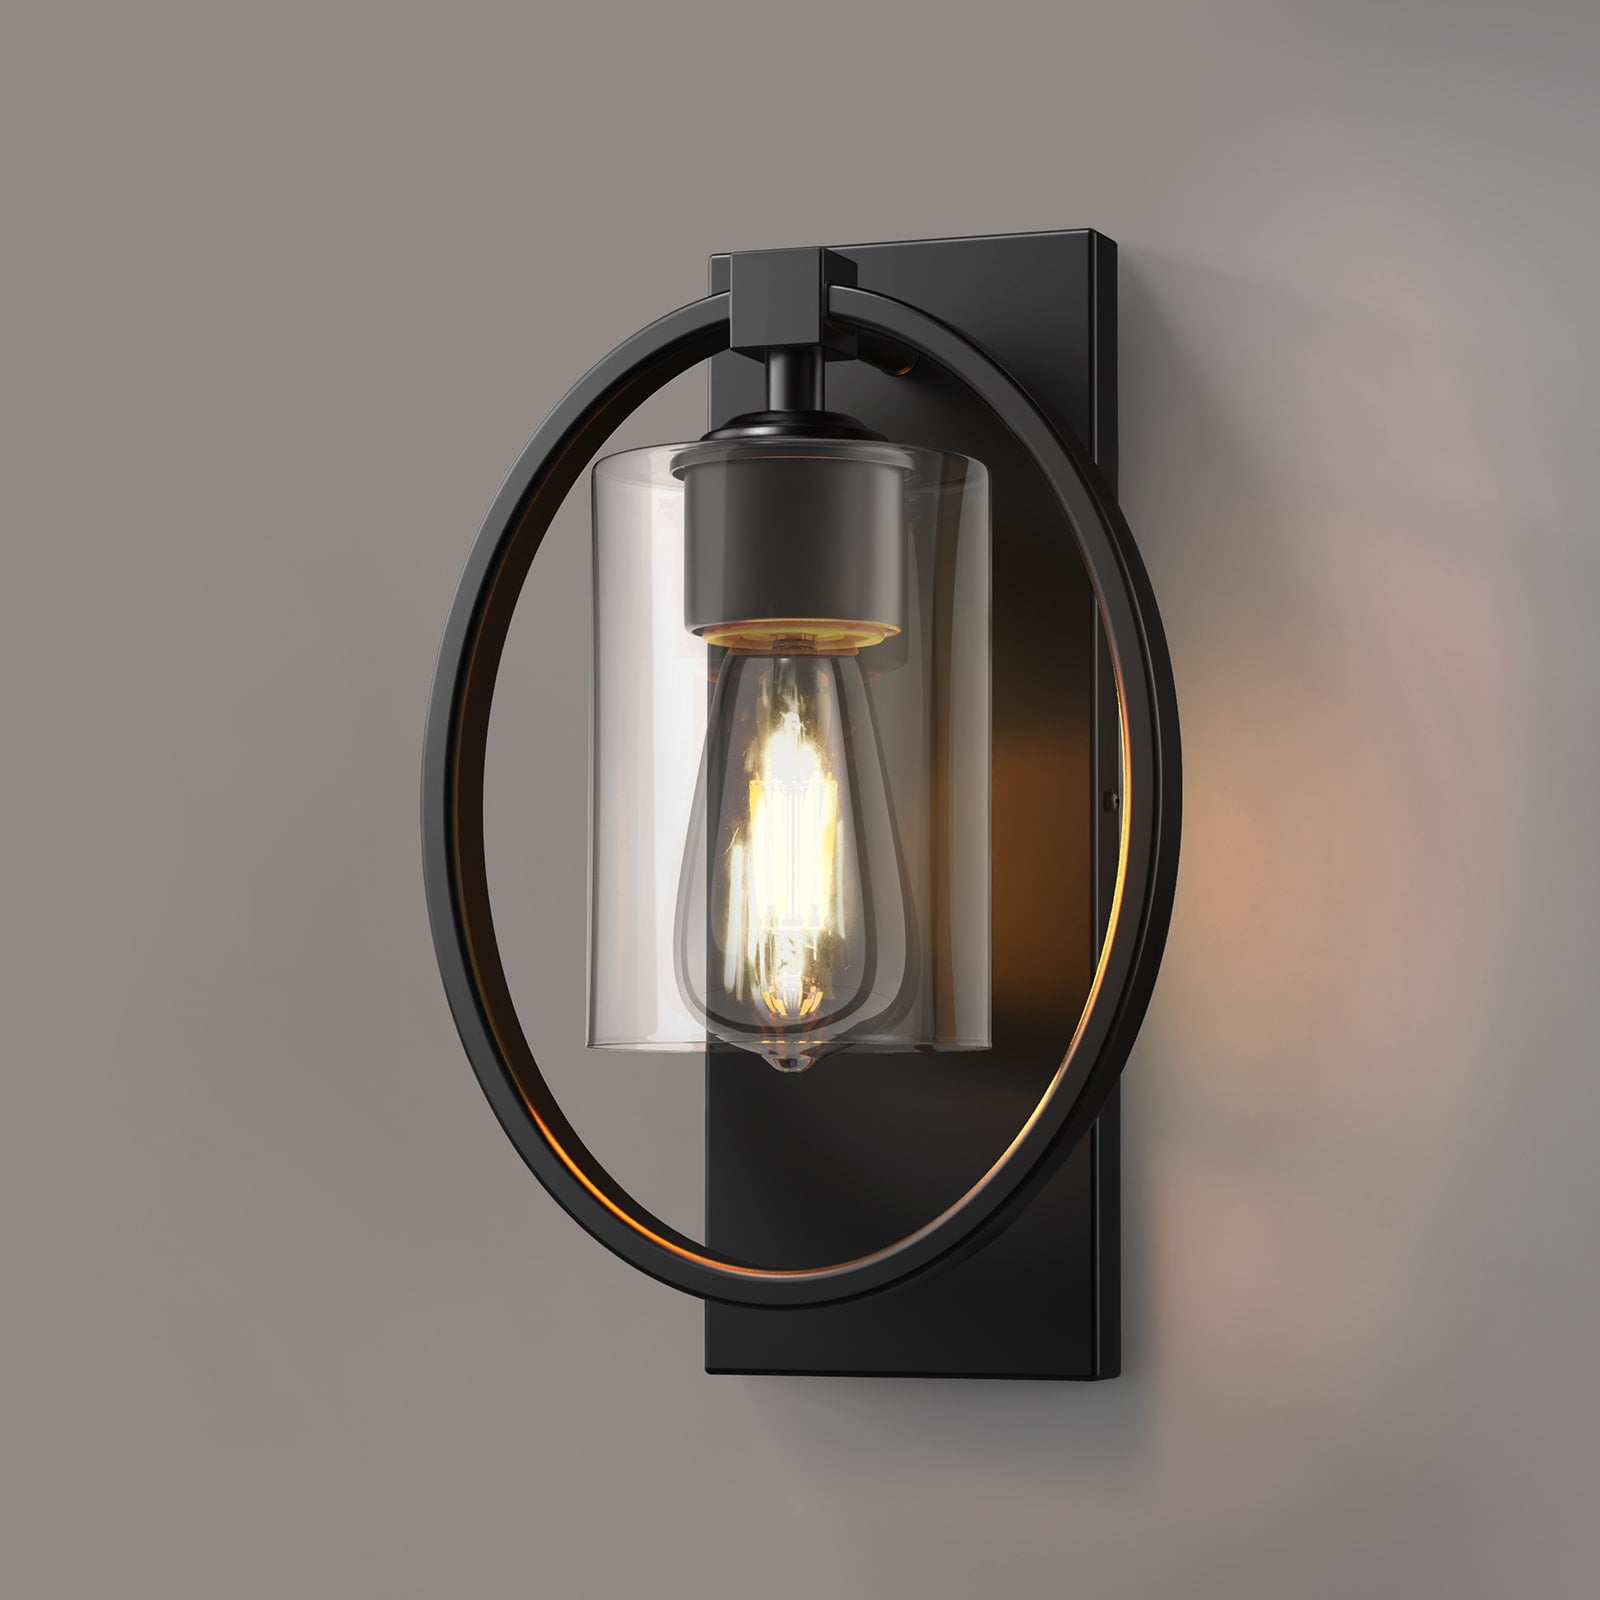 V02 Vintage Glass Wall Sconce with Ring Design, Industrial Wall Light Fixtures